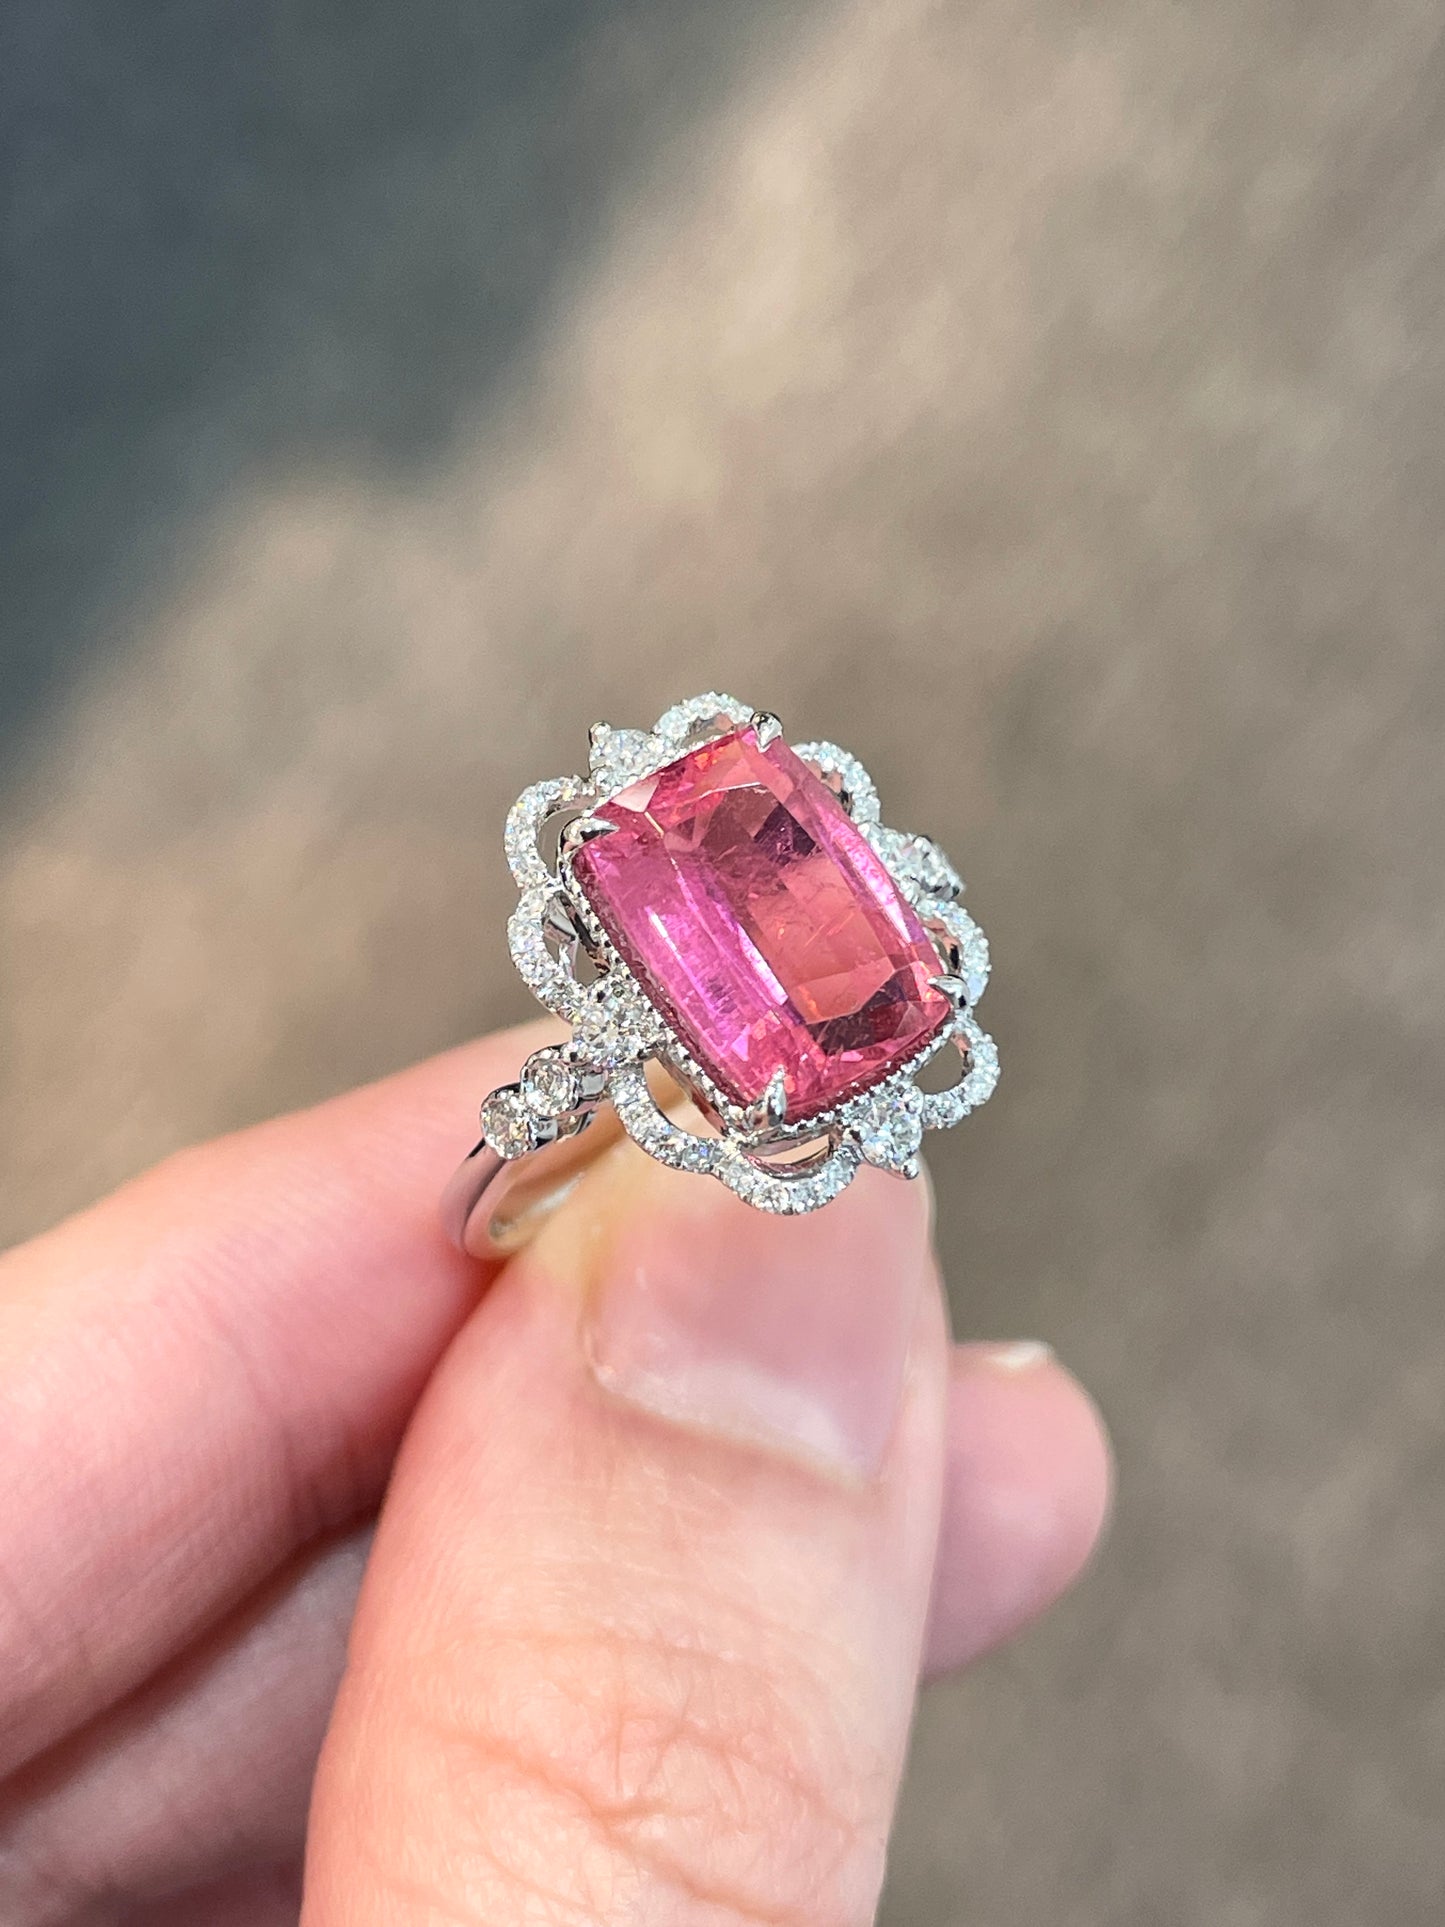 Natural Pink Tourmaline 3.77ct Ring Set With Natural Diamonds In 18k White Gold Gemstone Fine Jewellery Singapore